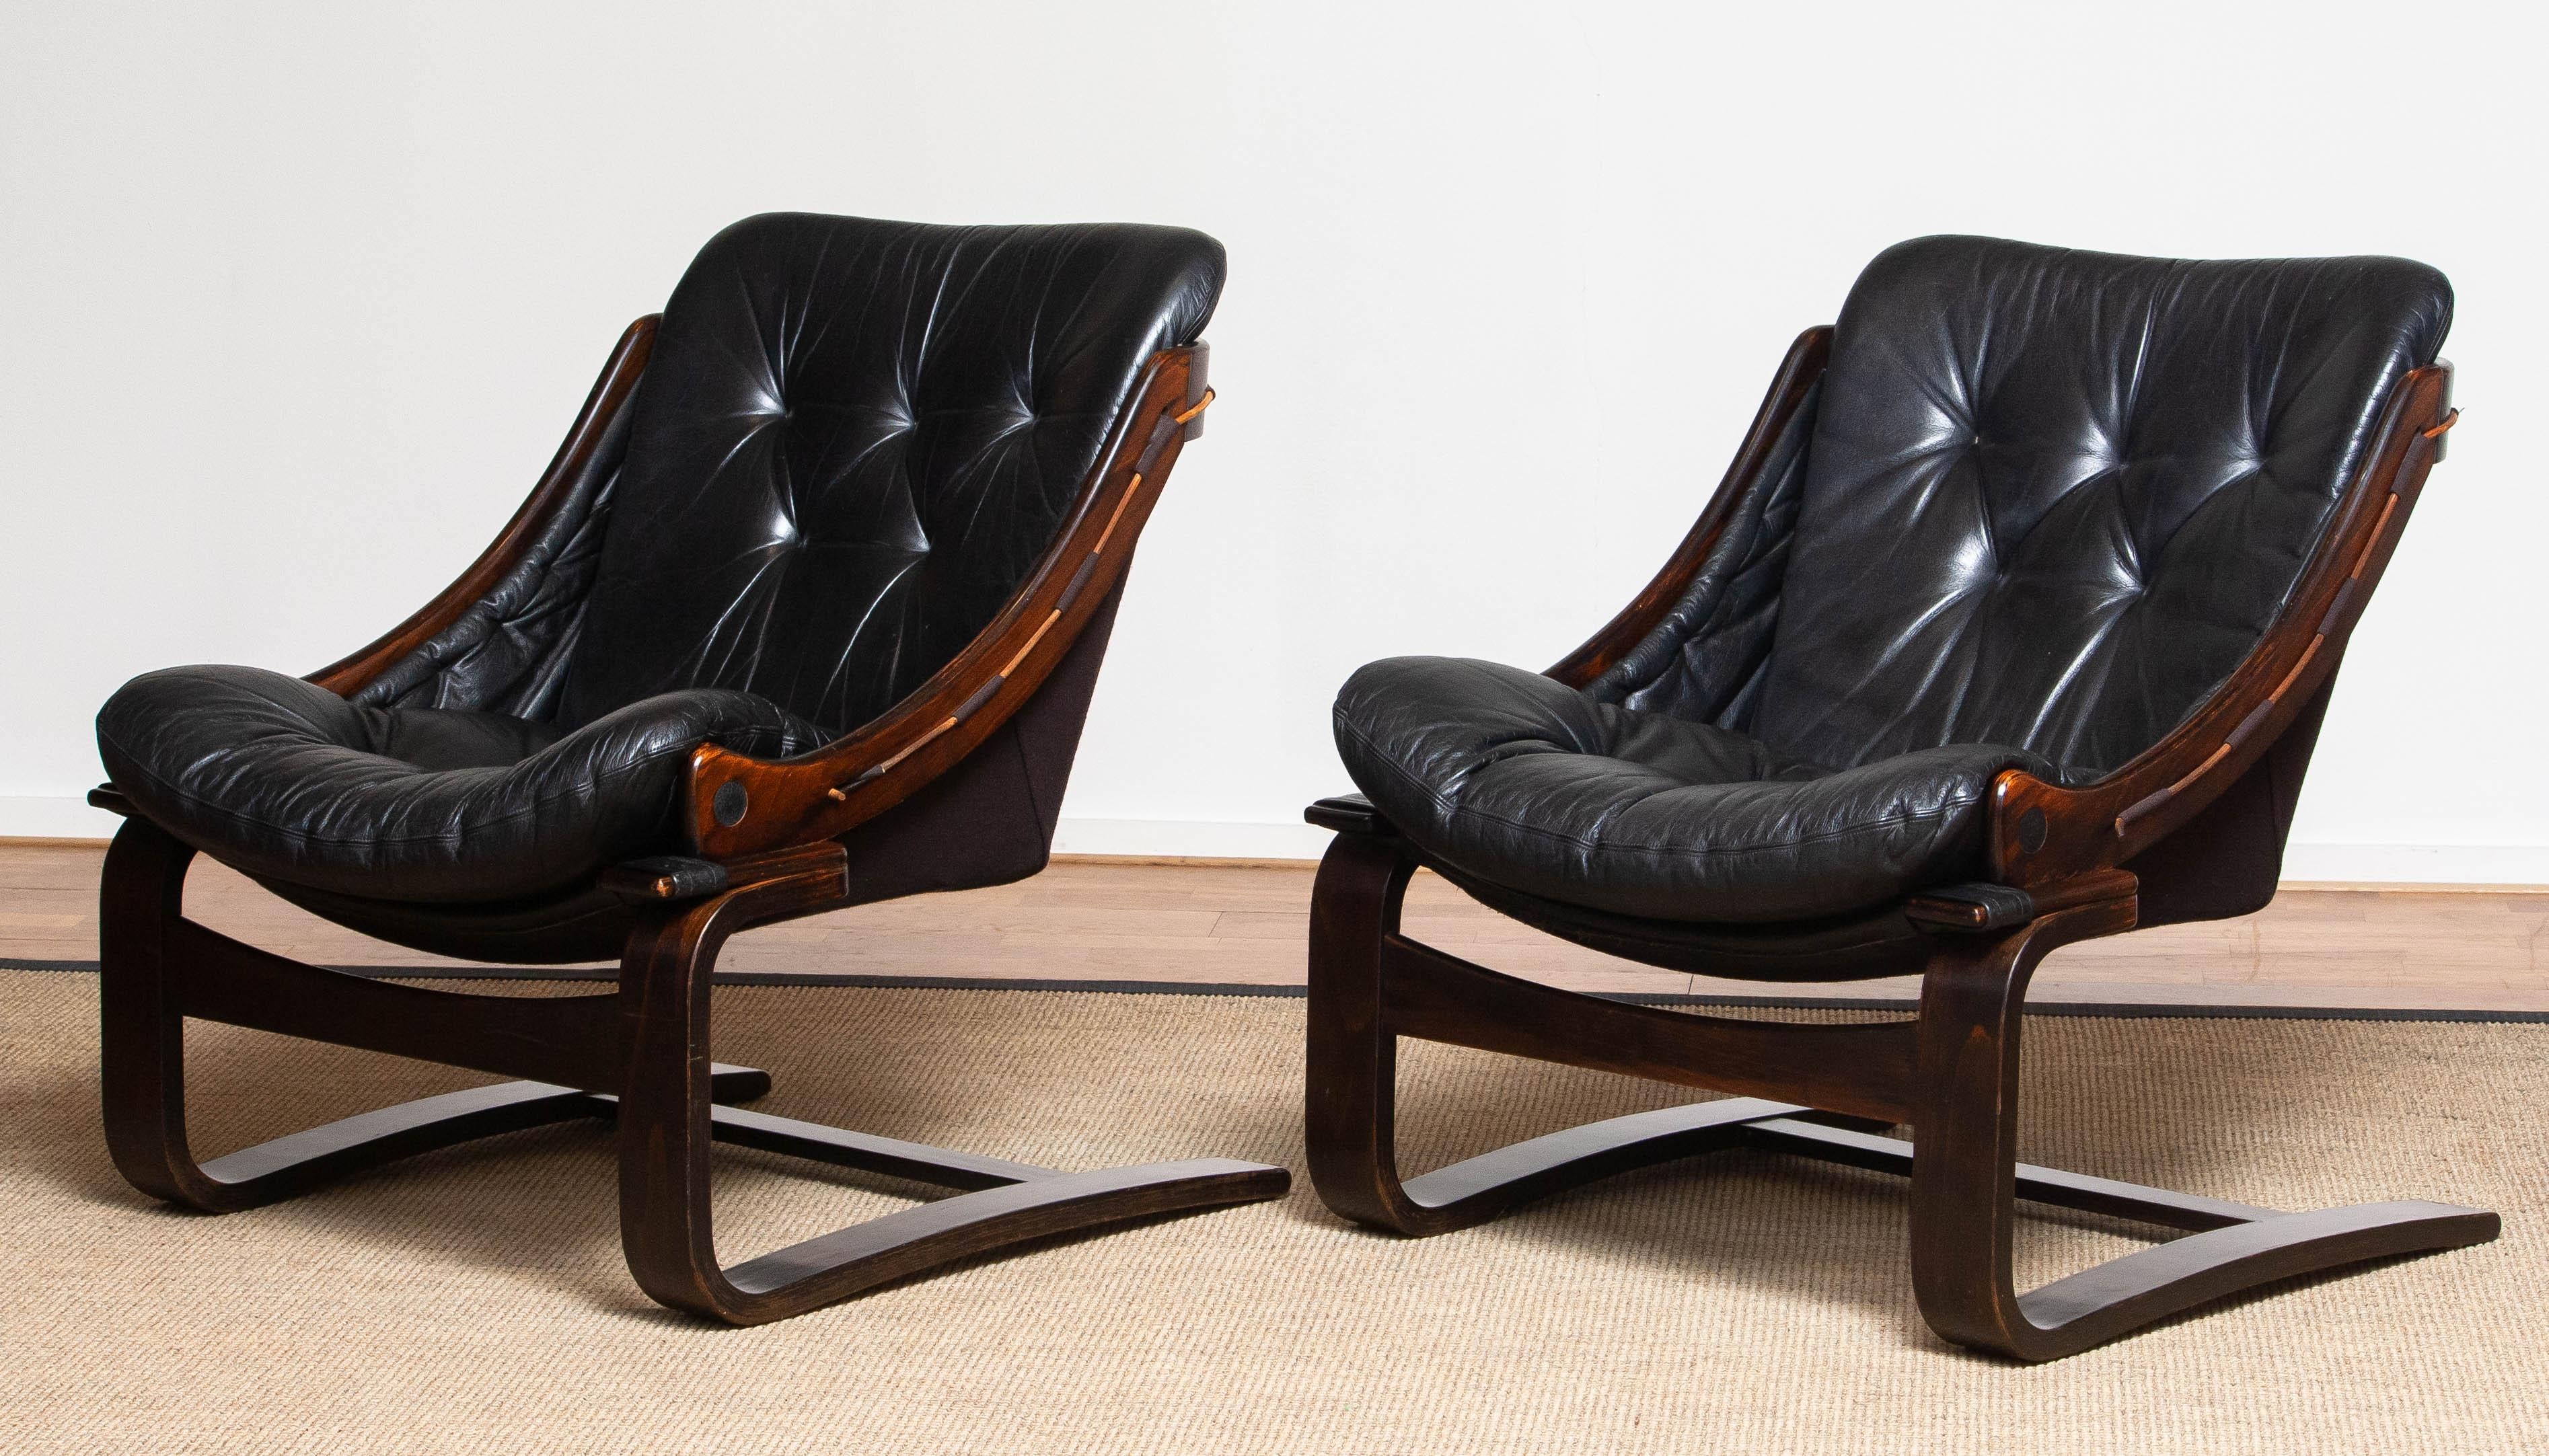 Original set of two Scandinavian lounge chairs designed by Ake Fribytter for Nelo Möbel in Sweden.
Both are upholstered with black leather and dark brown linen.
Overall in good condition.